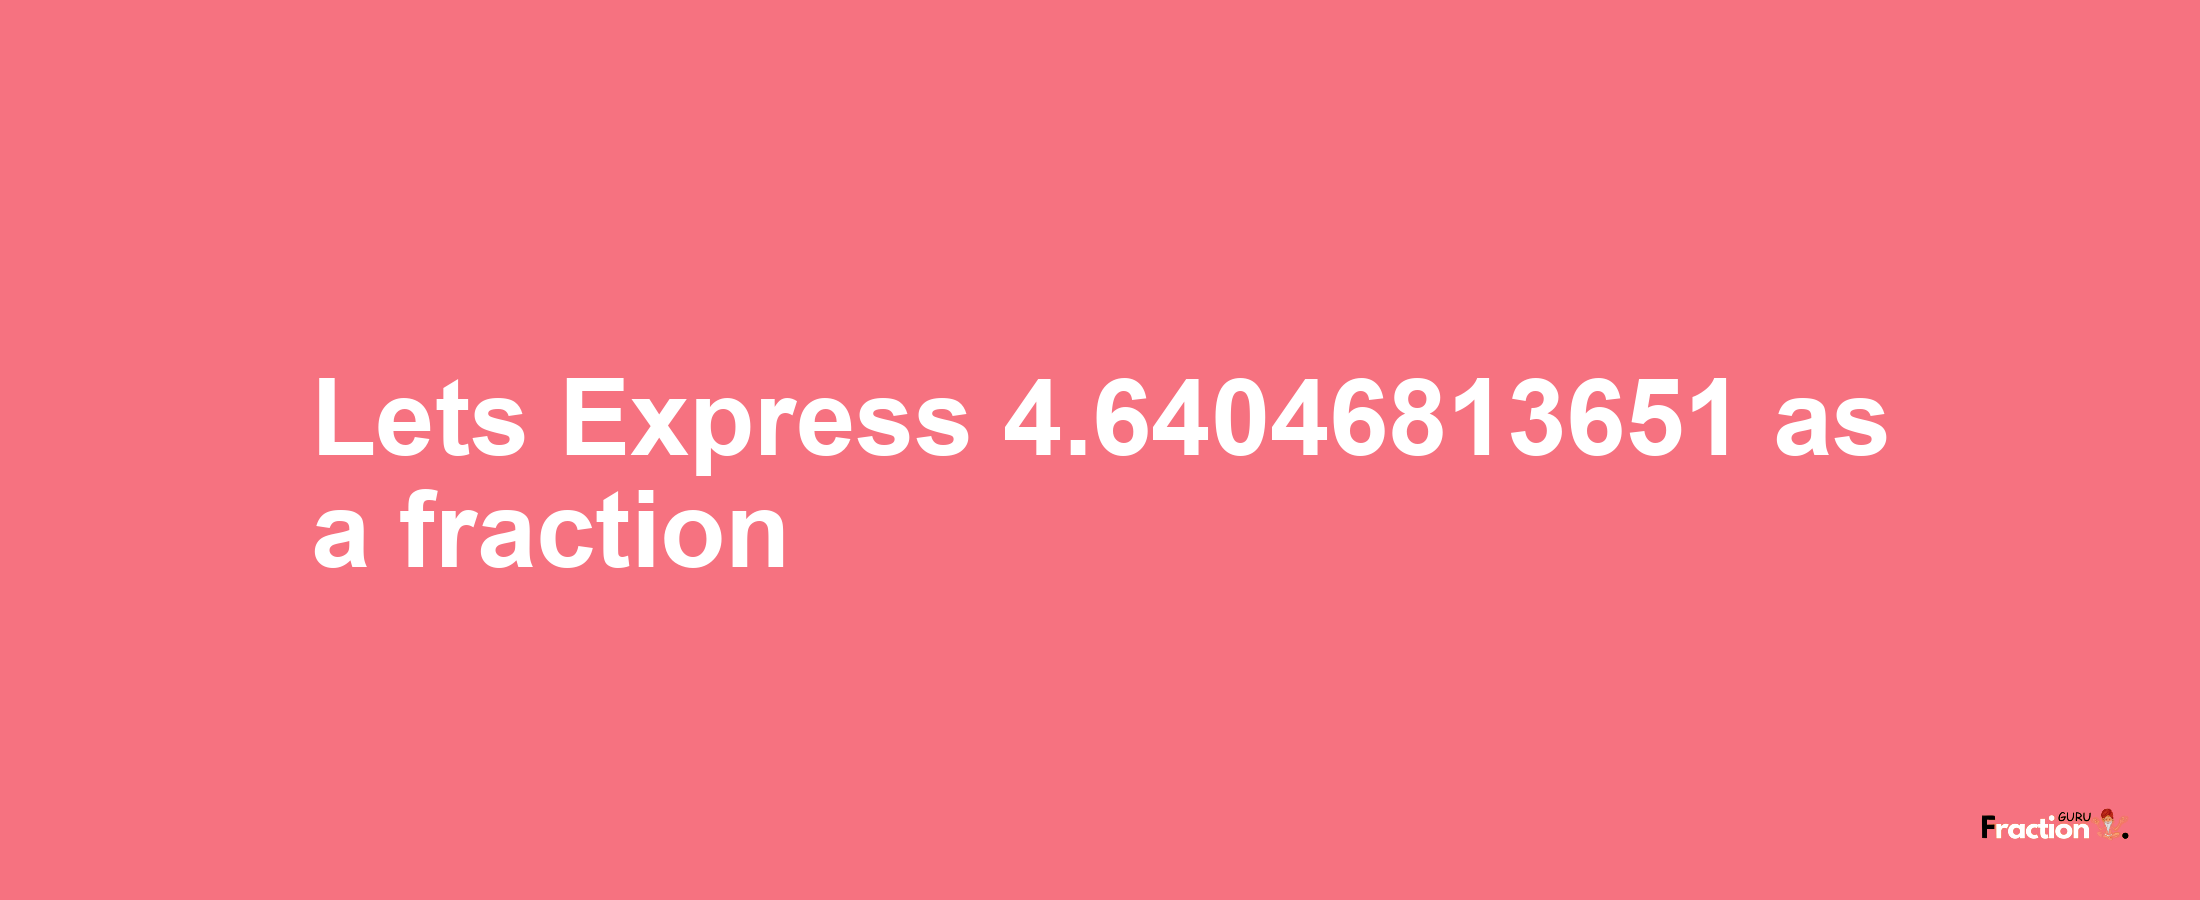 Lets Express 4.64046813651 as afraction